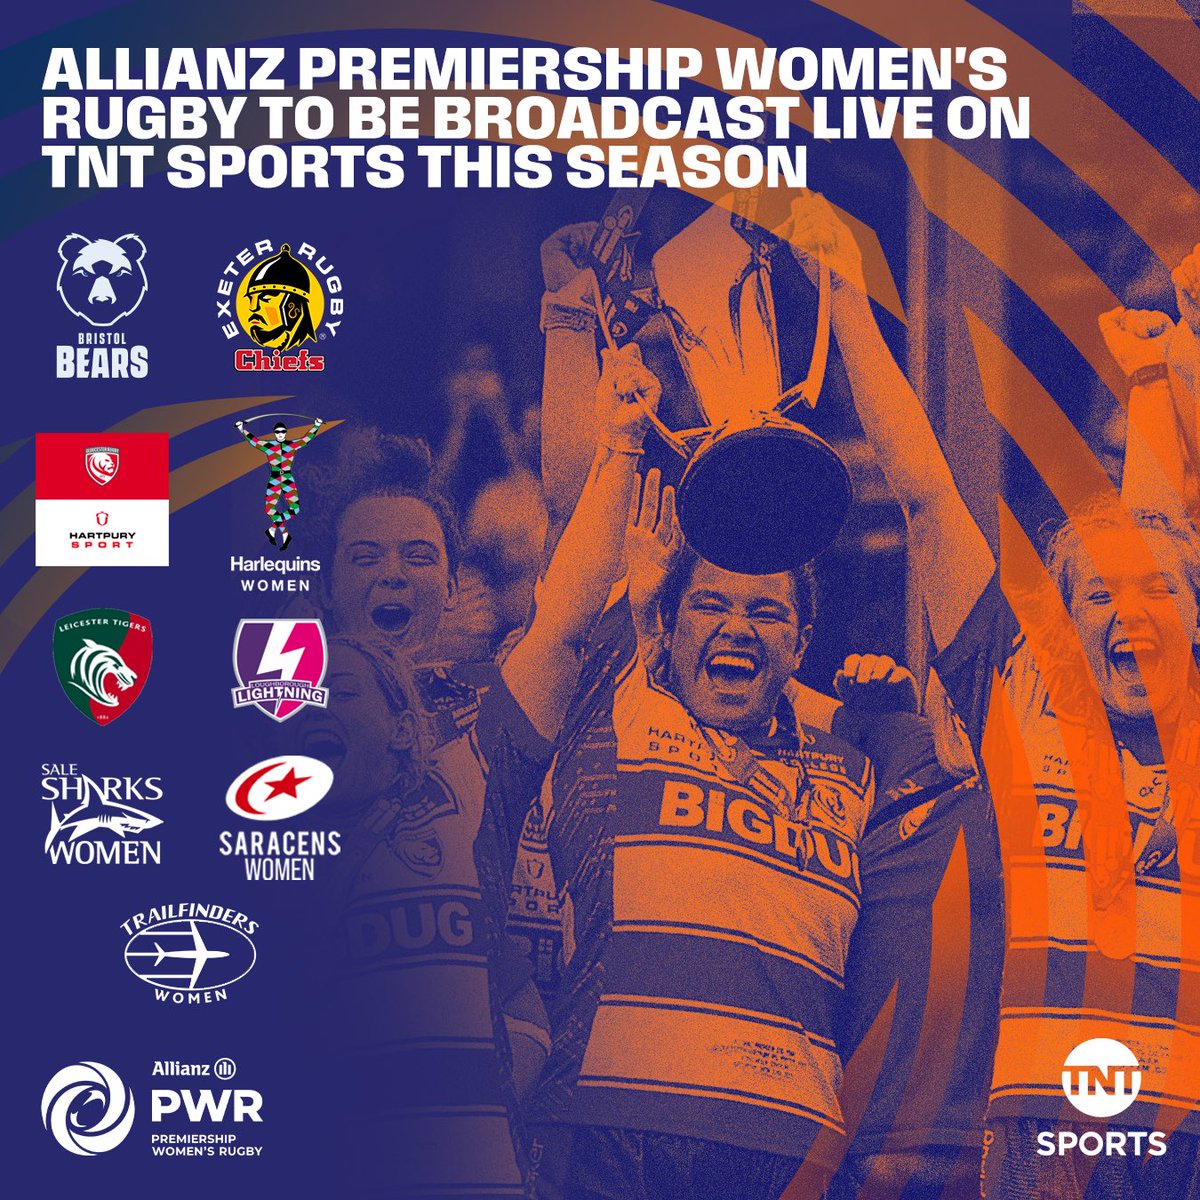 🚨𝘼𝙣𝙣𝙤𝙪𝙣𝙘𝙚𝙢𝙚𝙣𝙩 🚨 TNT Sports agrees multi-year deal to broadcast Allianz Premiership Women’s Rugby, commencing 2023-24 season. Link to full story: bit.ly/TNTAllianzPWR